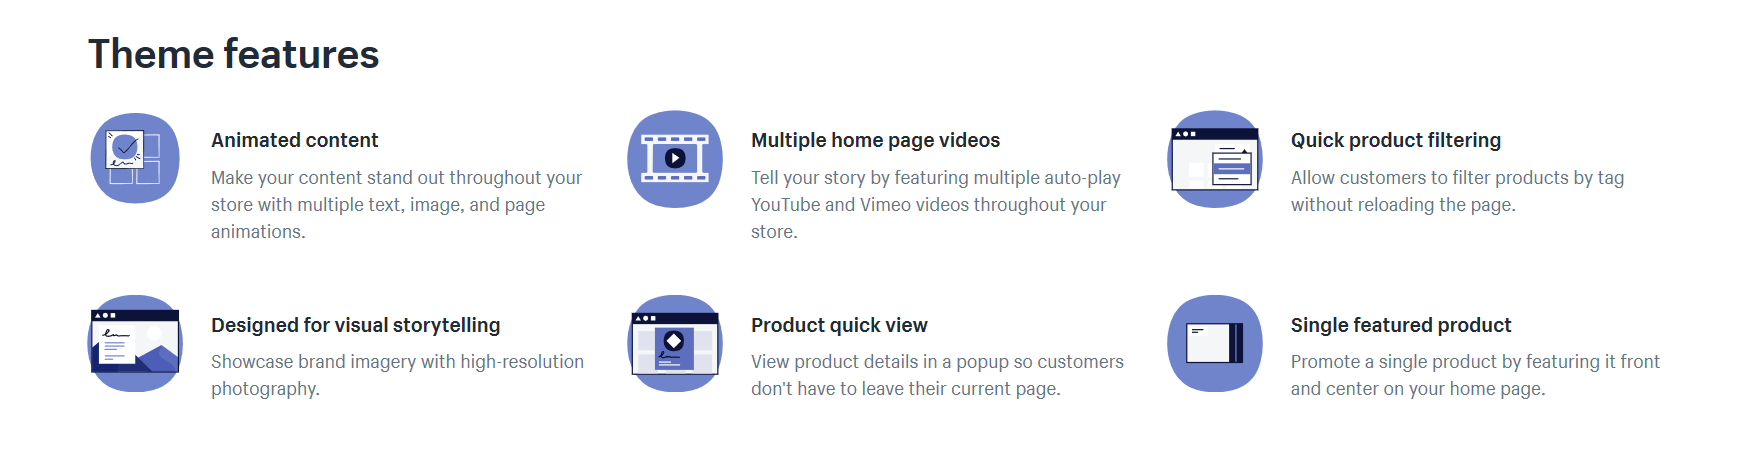 shopify motion theme main features review